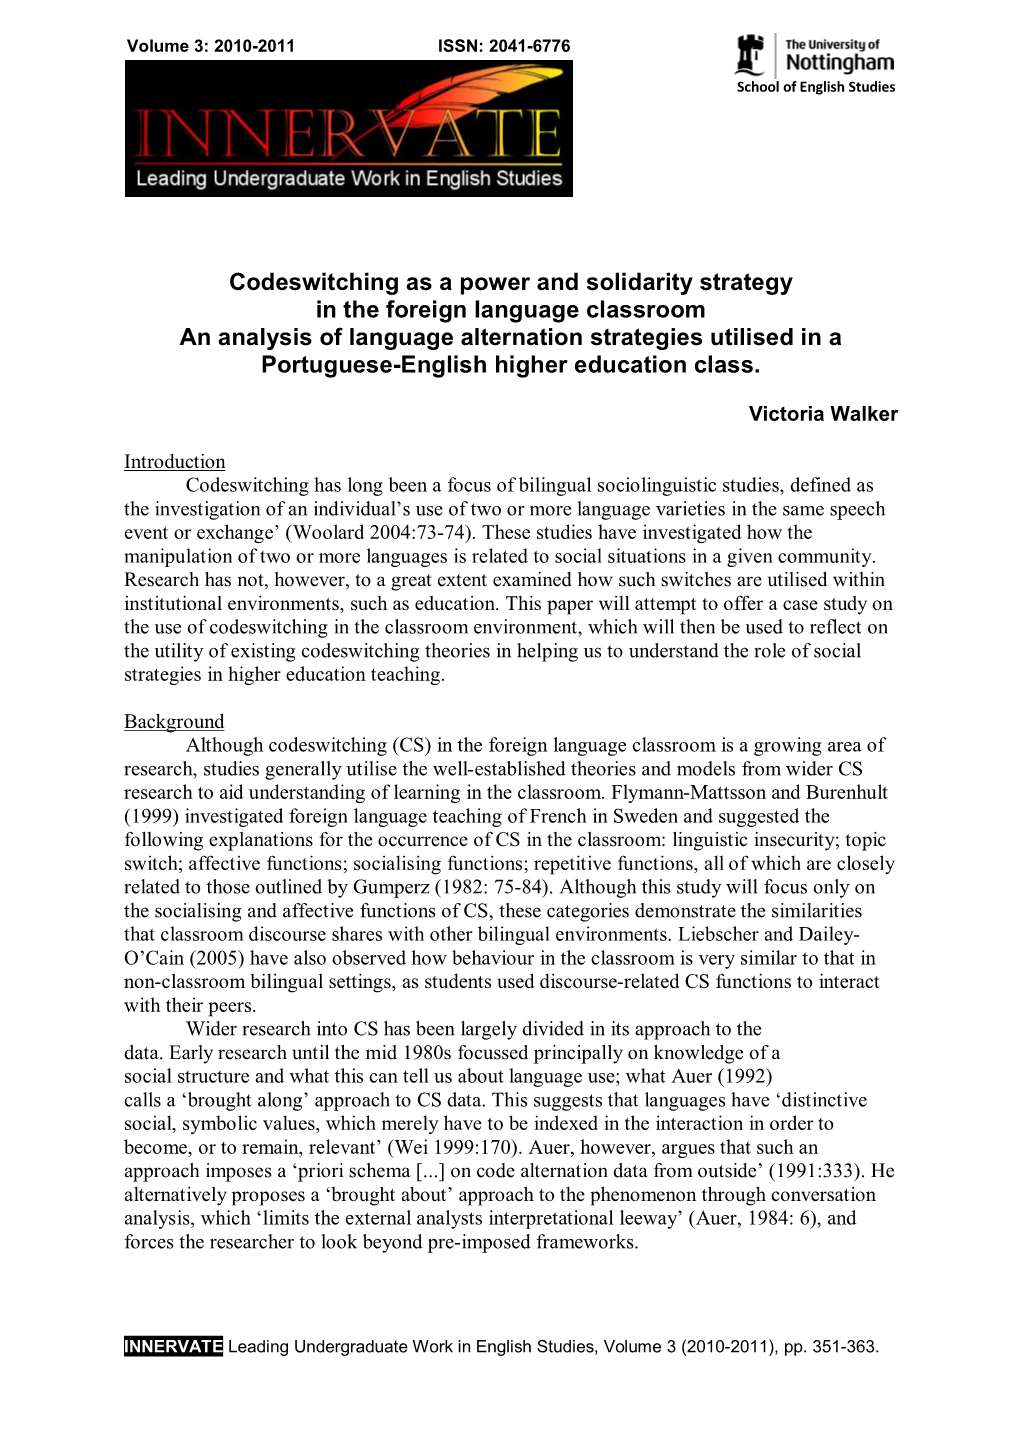 Codeswitching As a Power and Solidarity Strategy